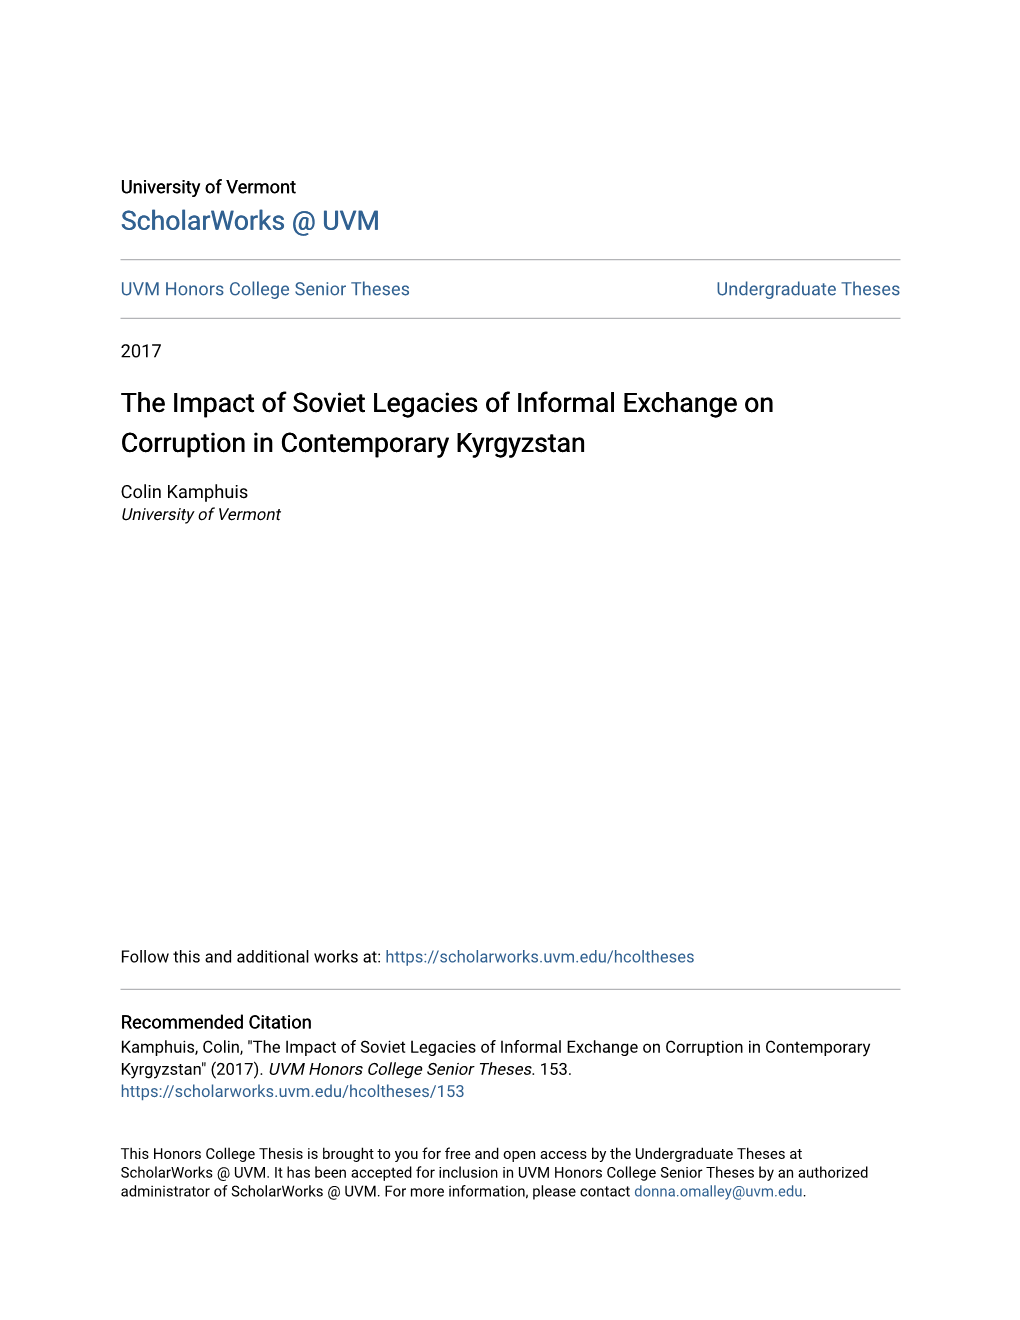 The Impact of Soviet Legacies of Informal Exchange on Corruption in Contemporary Kyrgyzstan